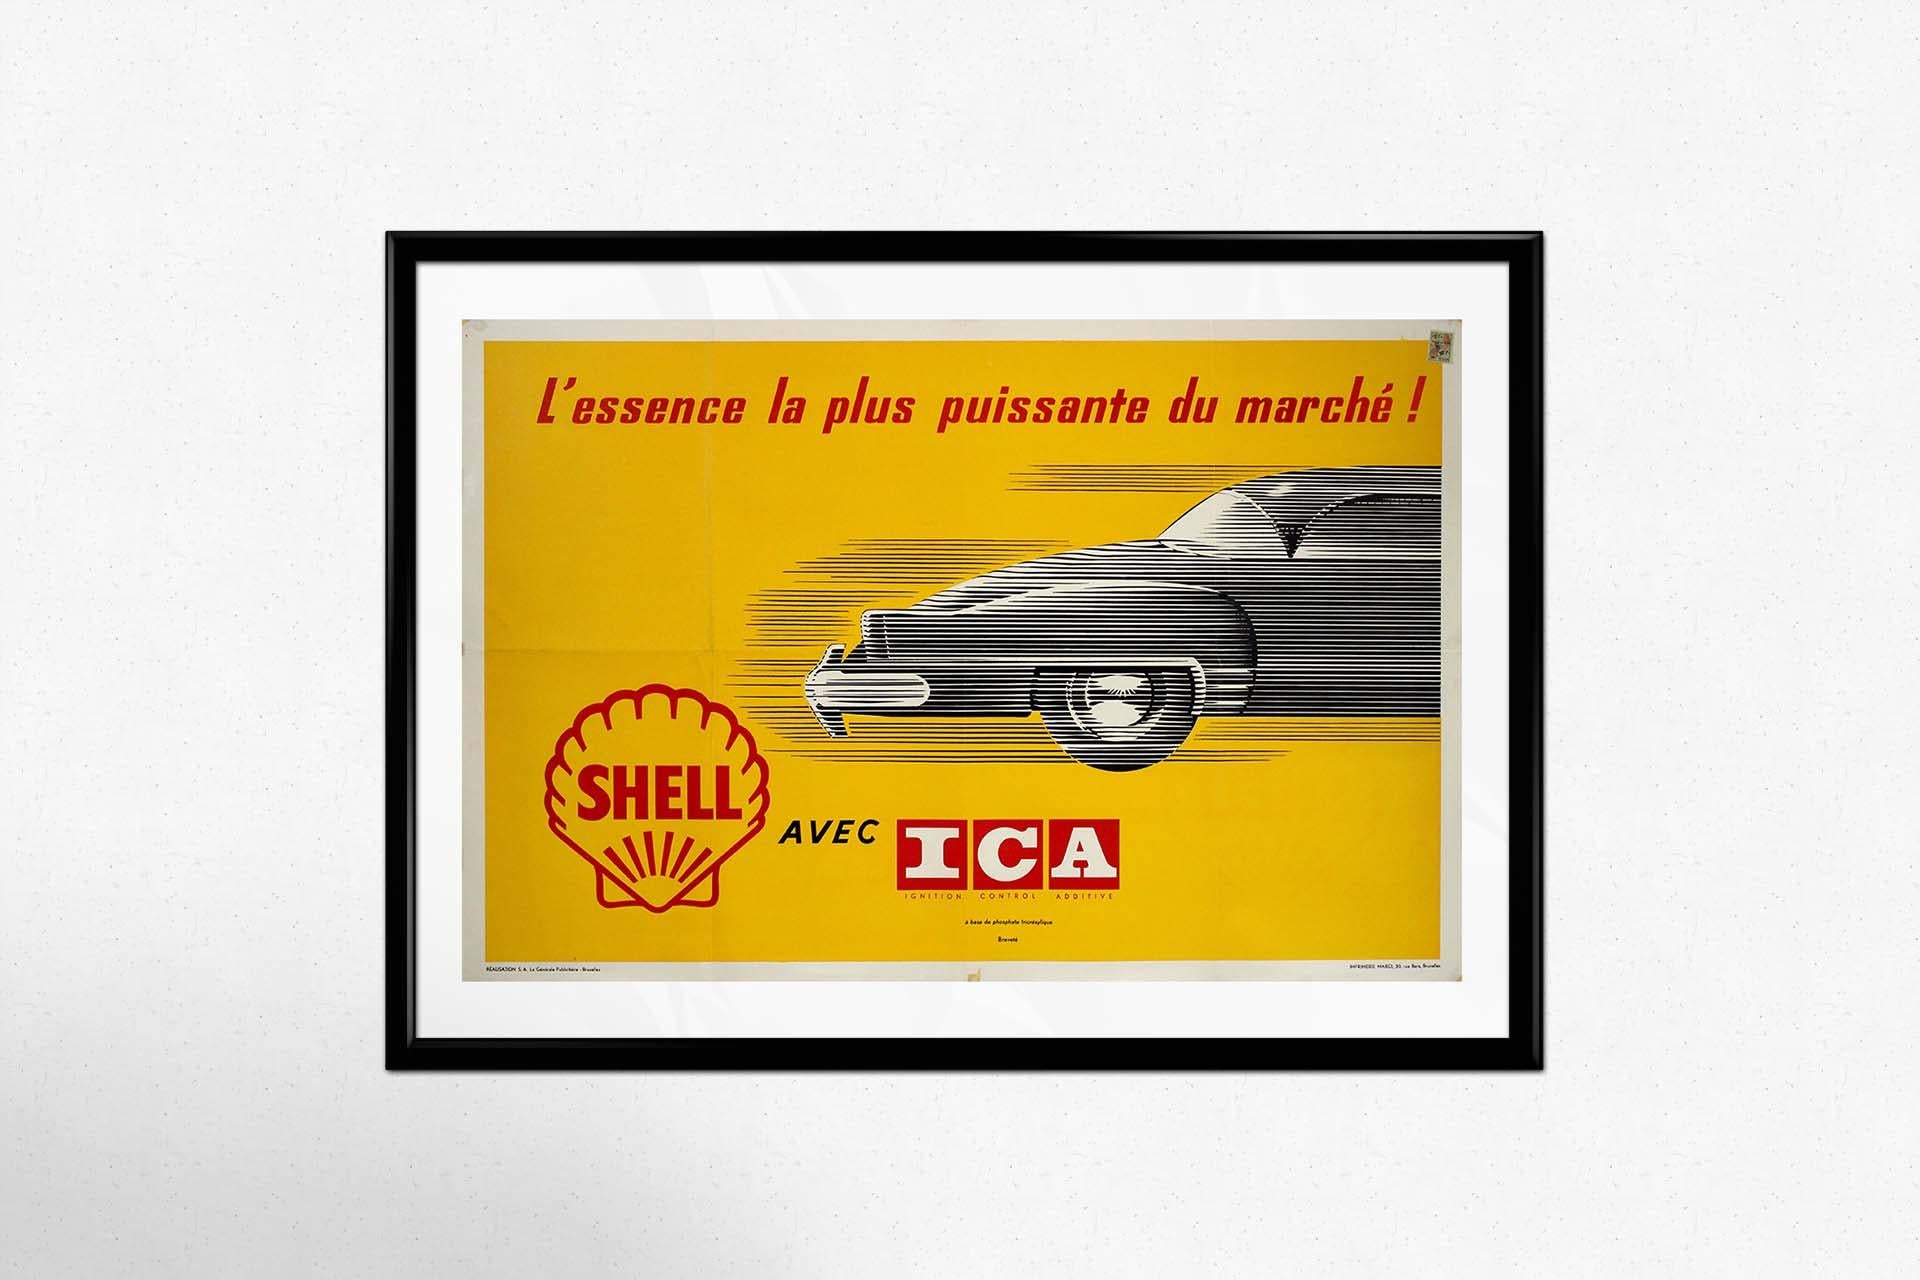 In the realm of vintage advertising travel posters, one iconic piece stands out: the original Shell poster featuring Ignition Control Additive (ICA), touted as the most powerful fuel on the market. Printed by Marci in Brussels, this poster